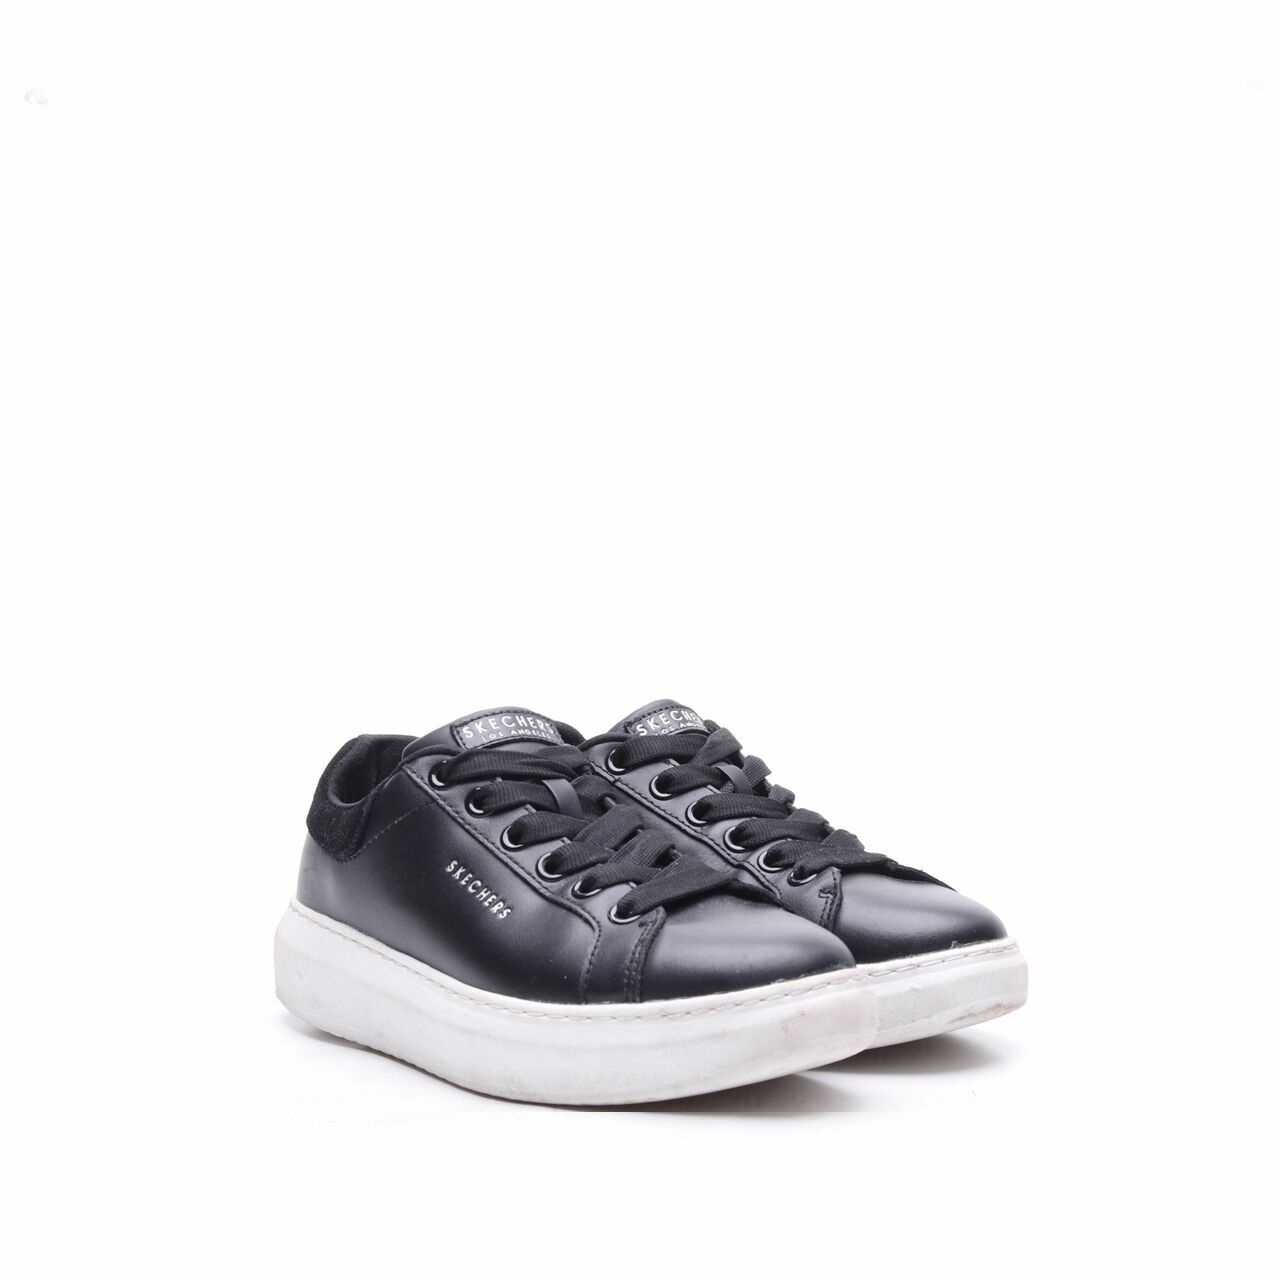 Skechers High Street Extremely Sole-Ful Black Sneakers